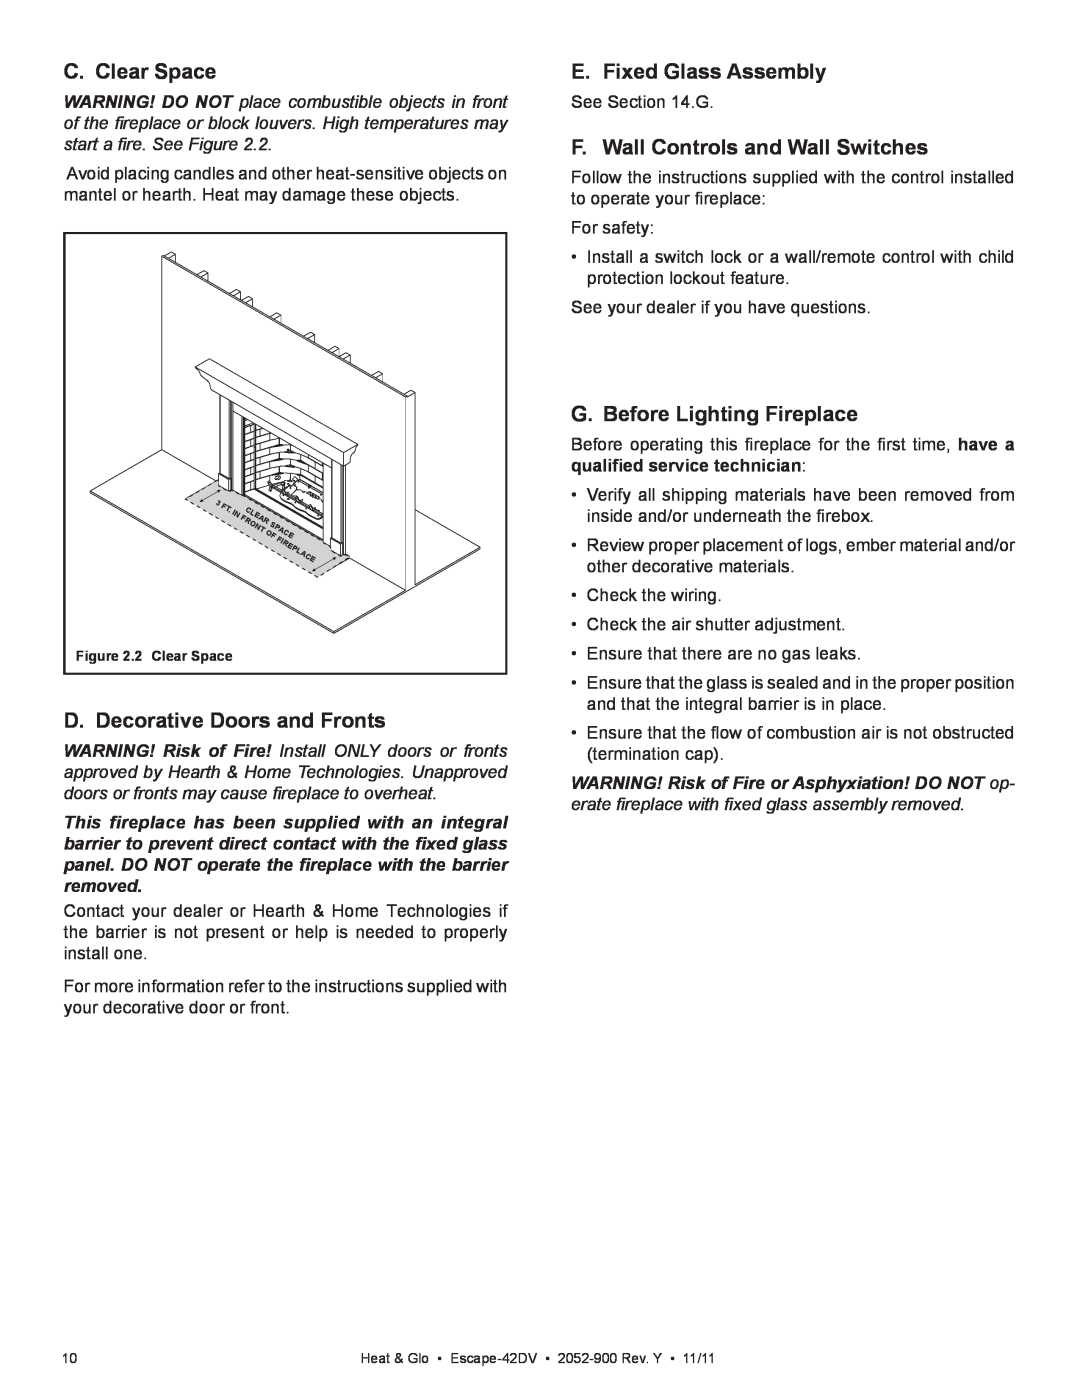 Heat & Glo LifeStyle Escape-42DVLP owner manual C. Clear Space, D. Decorative Doors and Fronts, E. Fixed Glass Assembly 